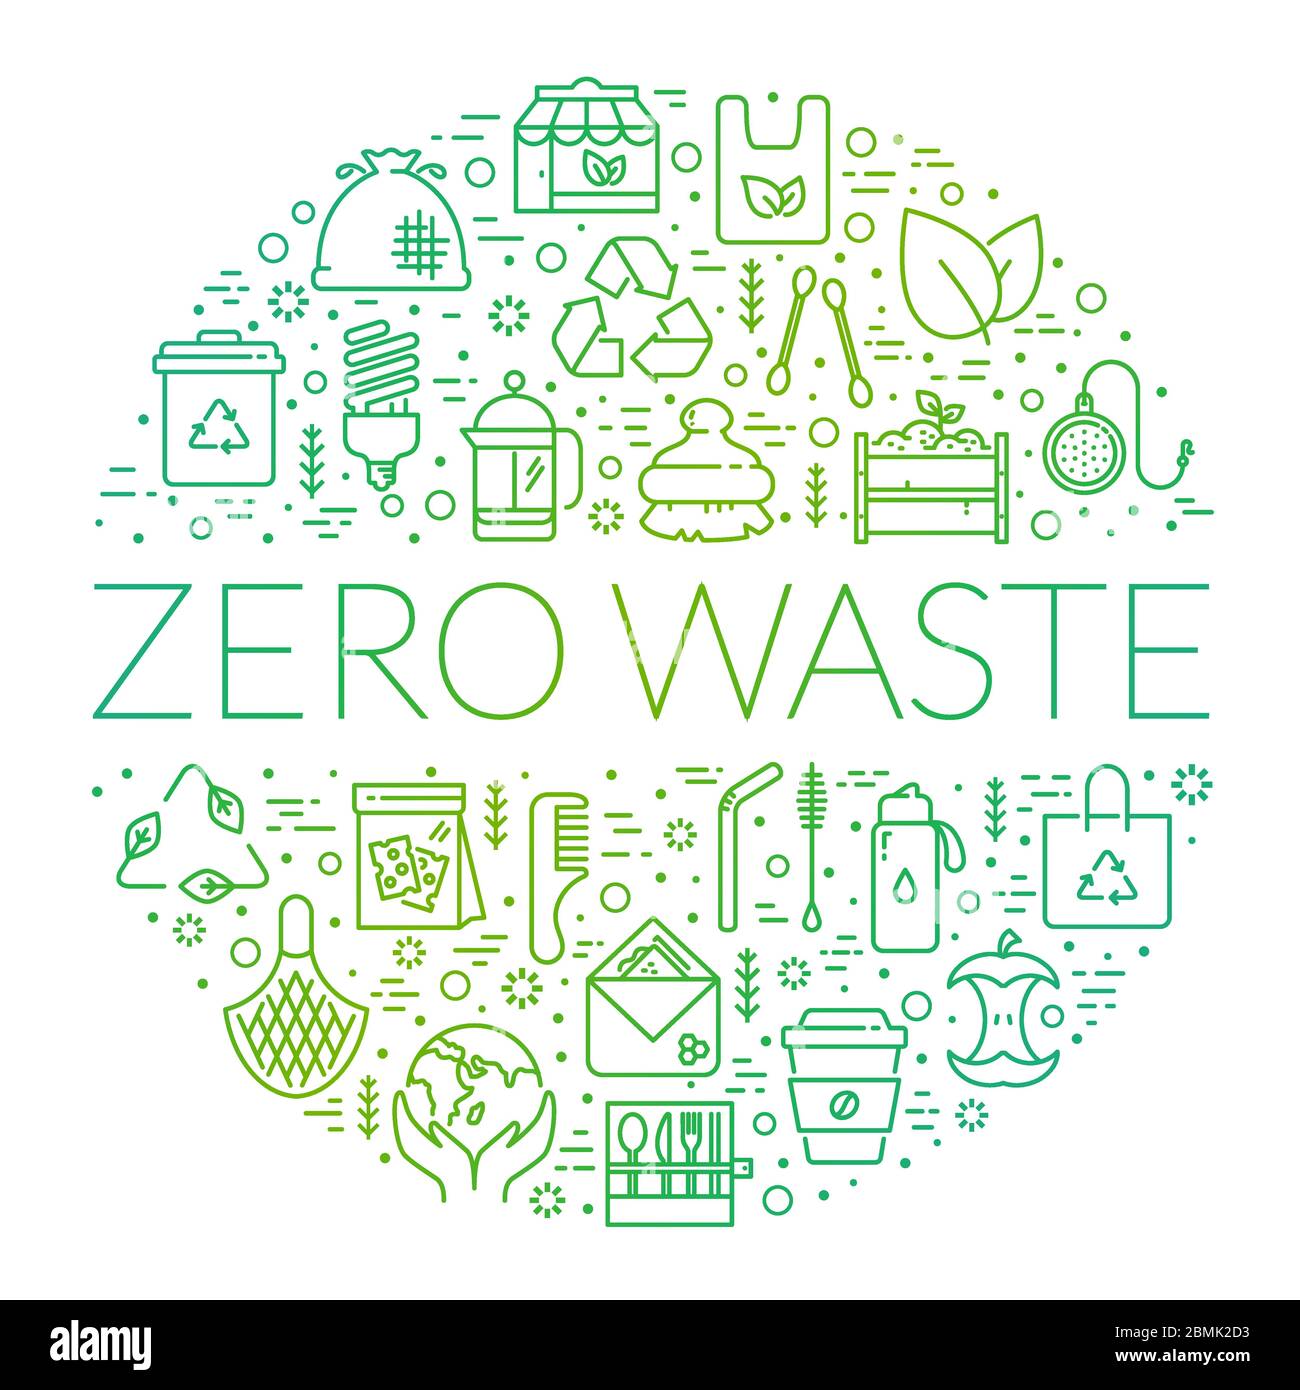 Zero waste vector banner. Recycling, reusable items, save the Planet, eco lifestyle themes. Circle shape made of line symbols isolated on white. Stock Vector